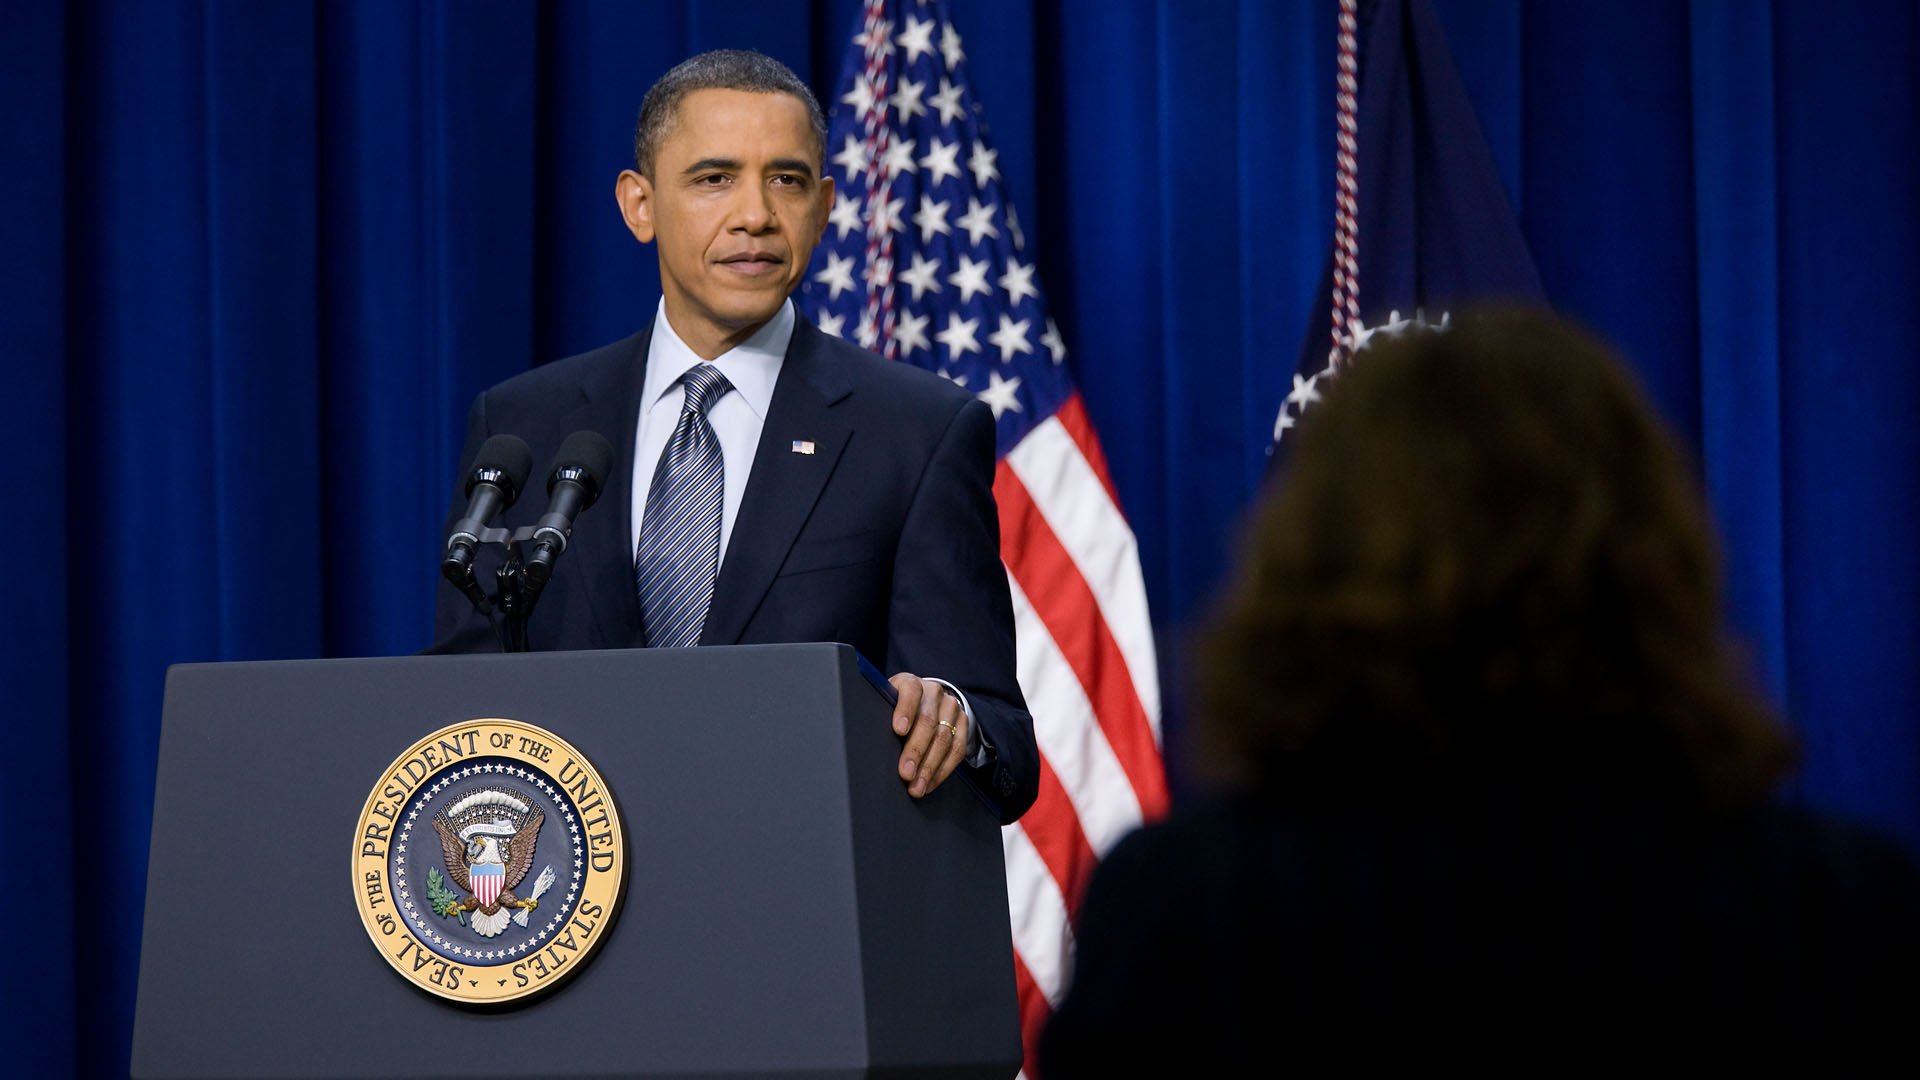 President Obama Listens to a Question During a Press Conference 